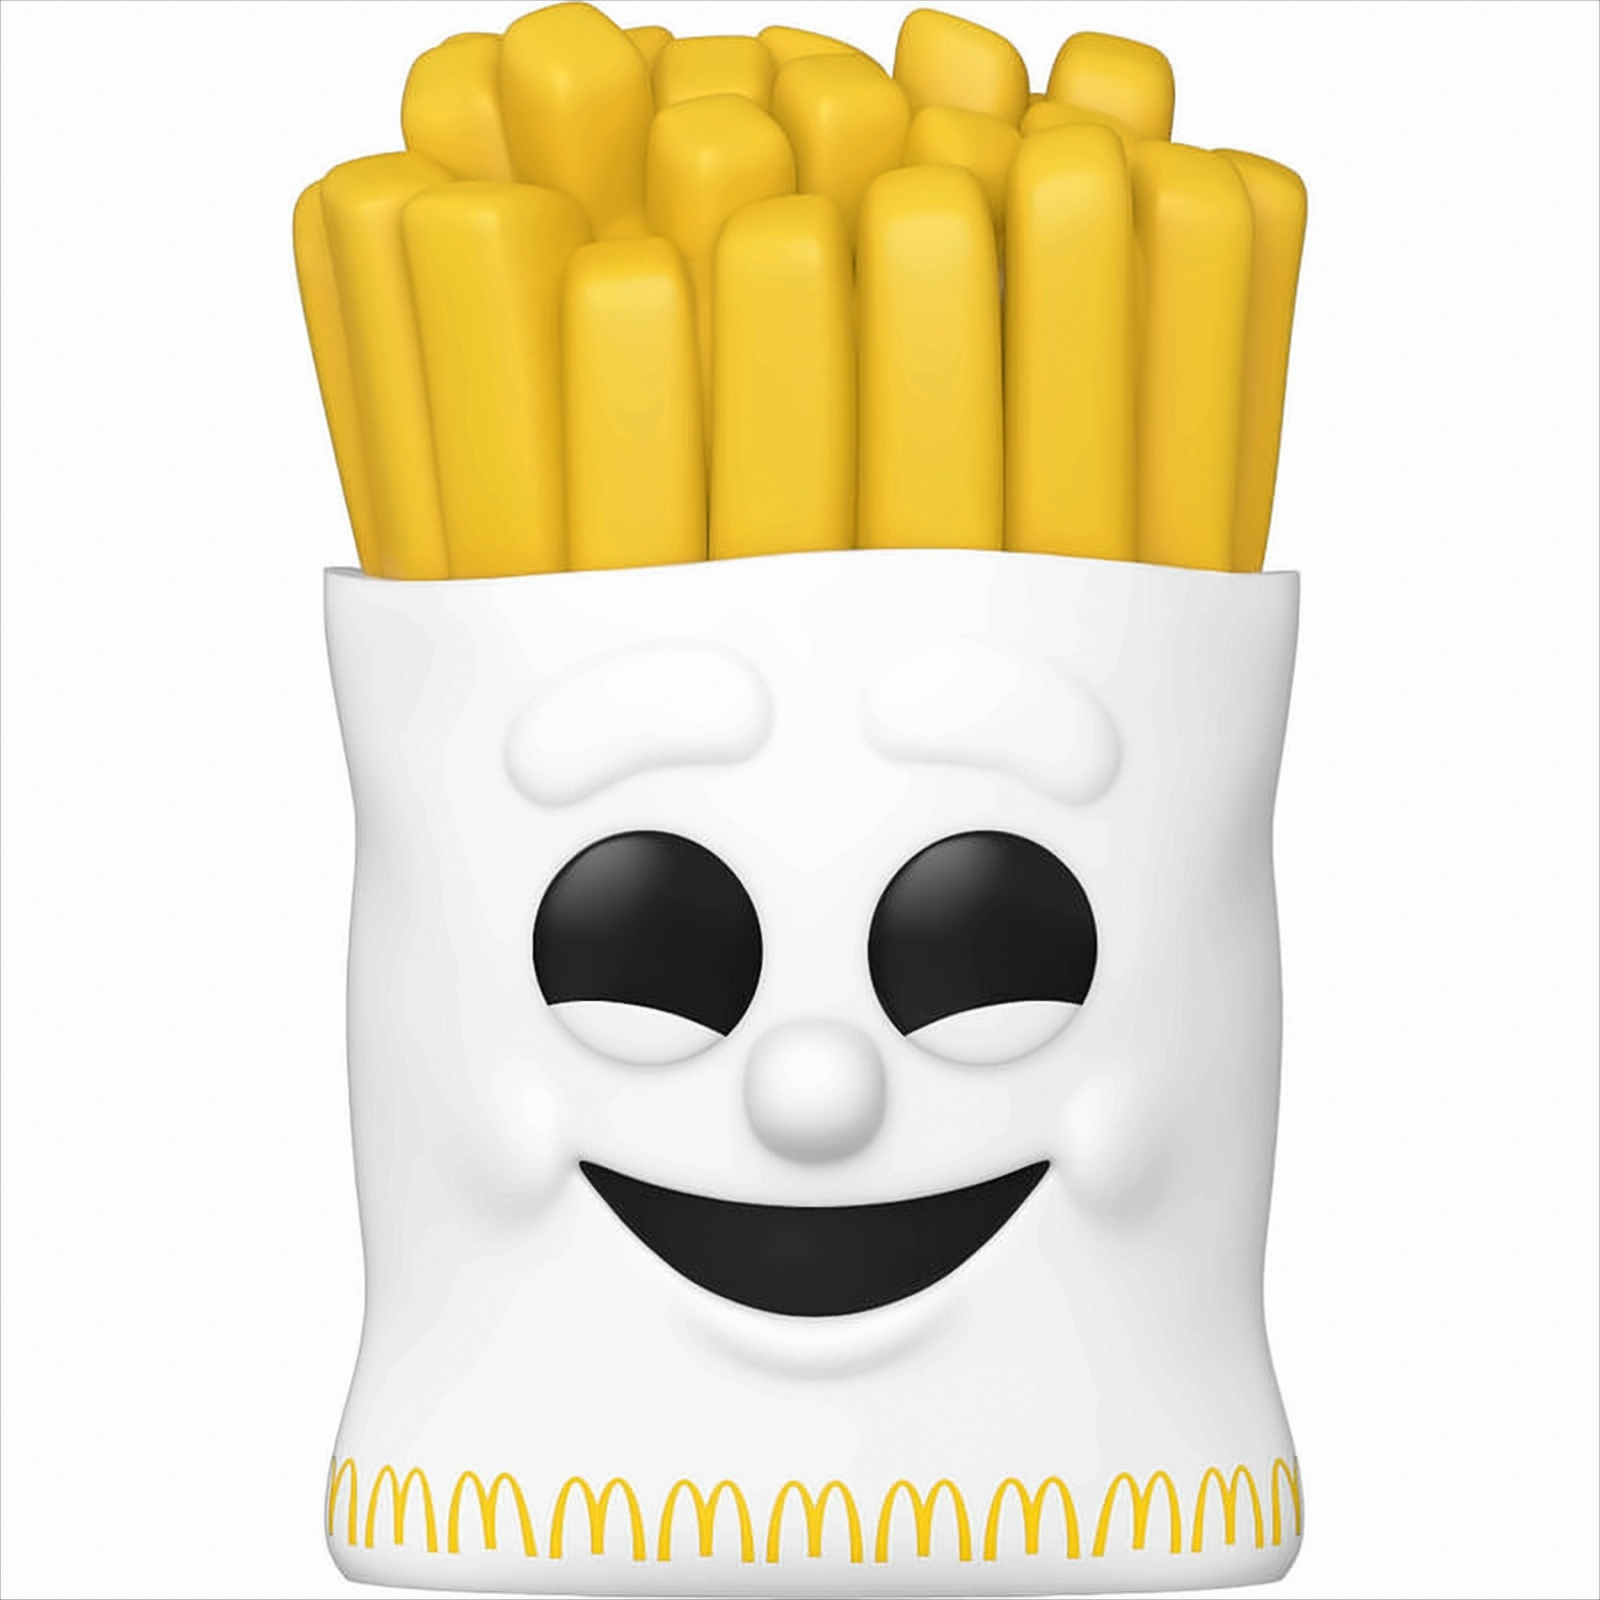 POP - McDonald´s - Meal French Fries Squad